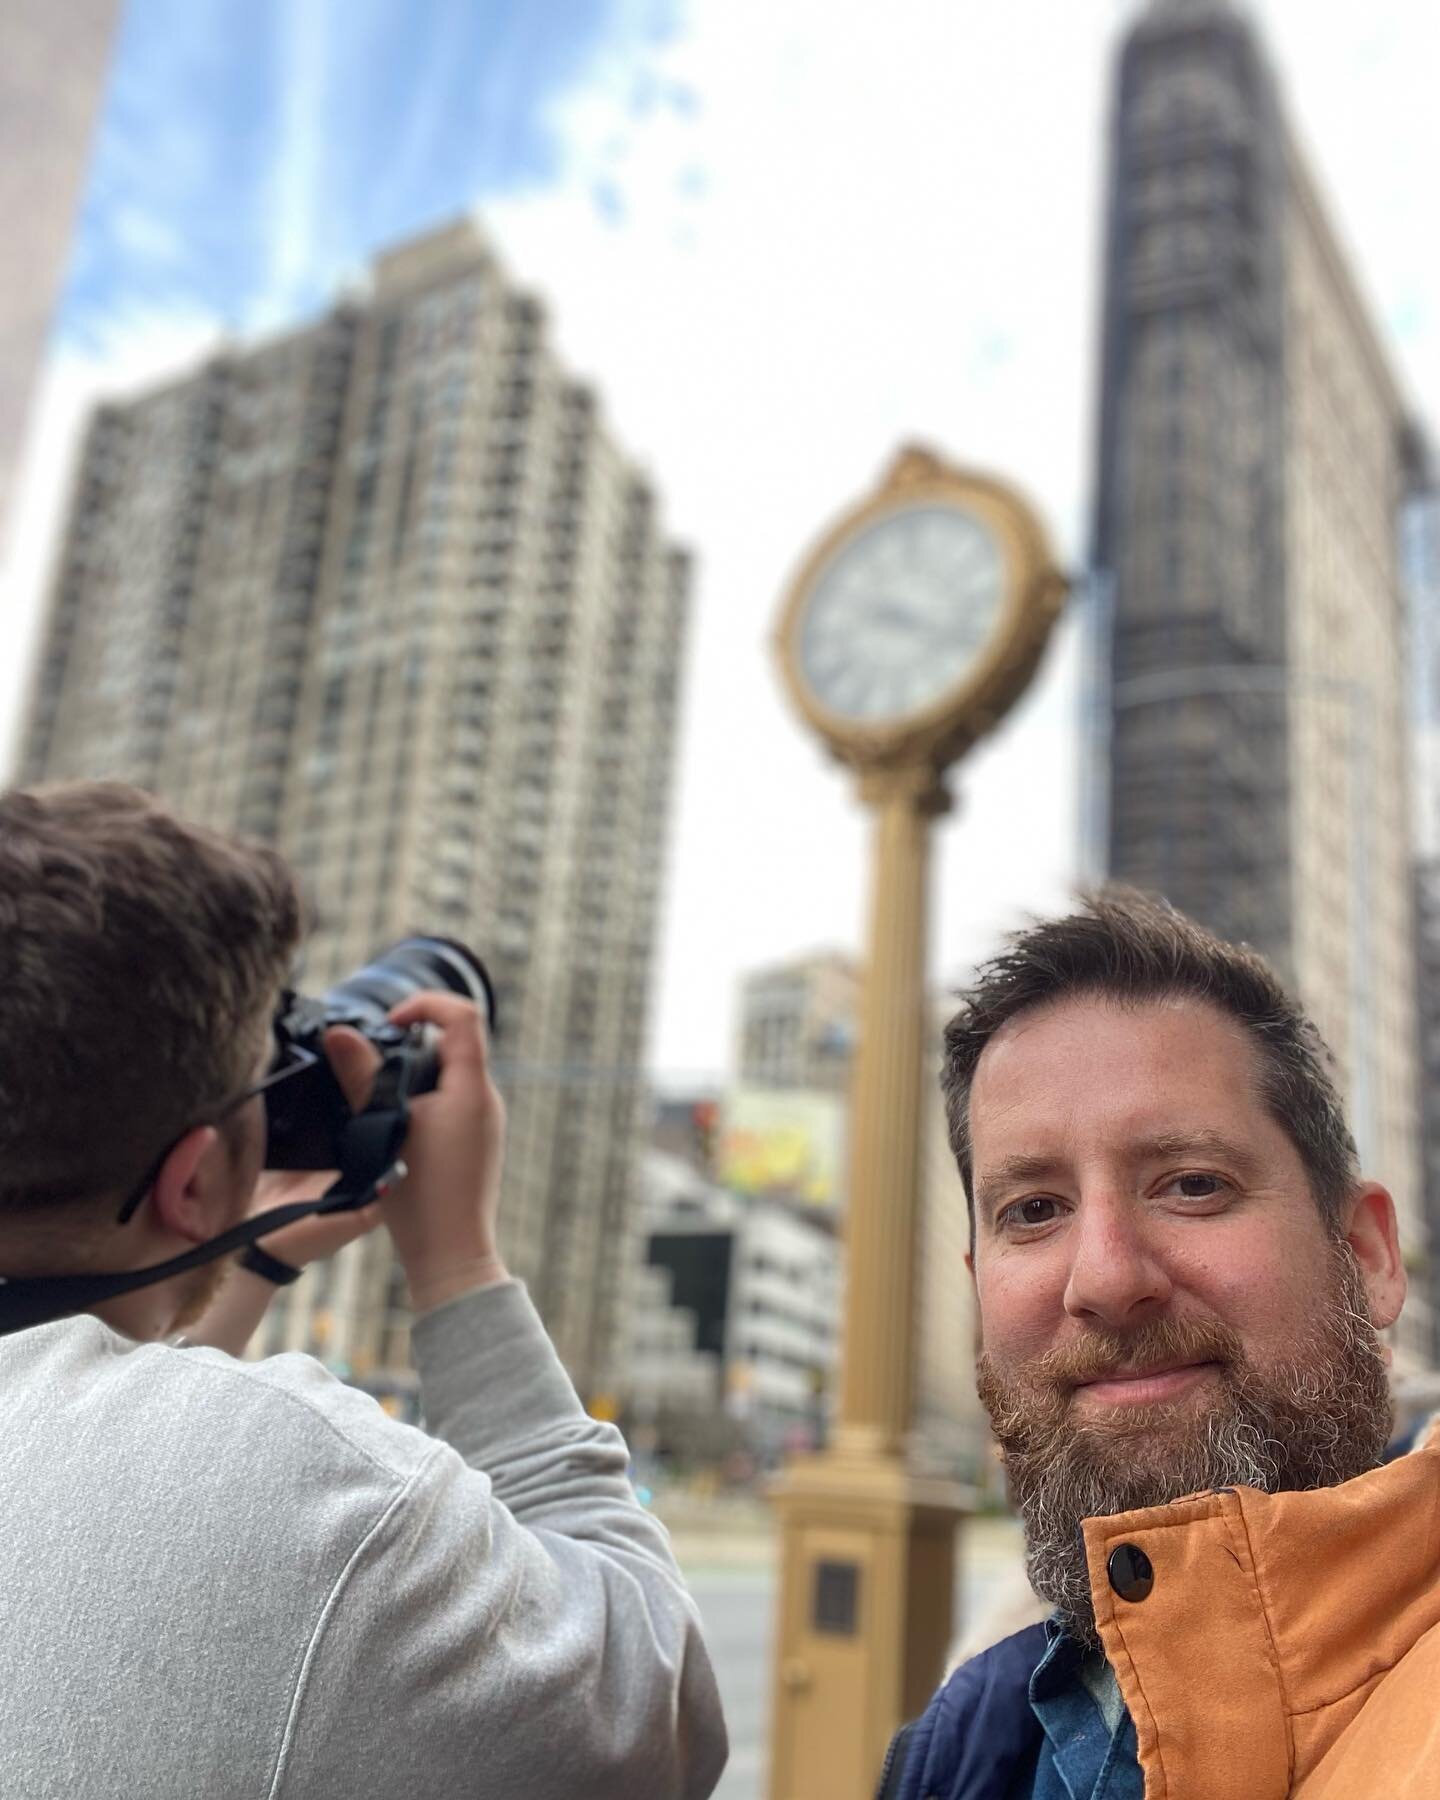 It&rsquo;s my 1-year anniversary at @willowtreeapps and I get to spend it filming in NYC with @zphillips.photo 

#willowtree #2weekstobetter #lifeatwillowtree